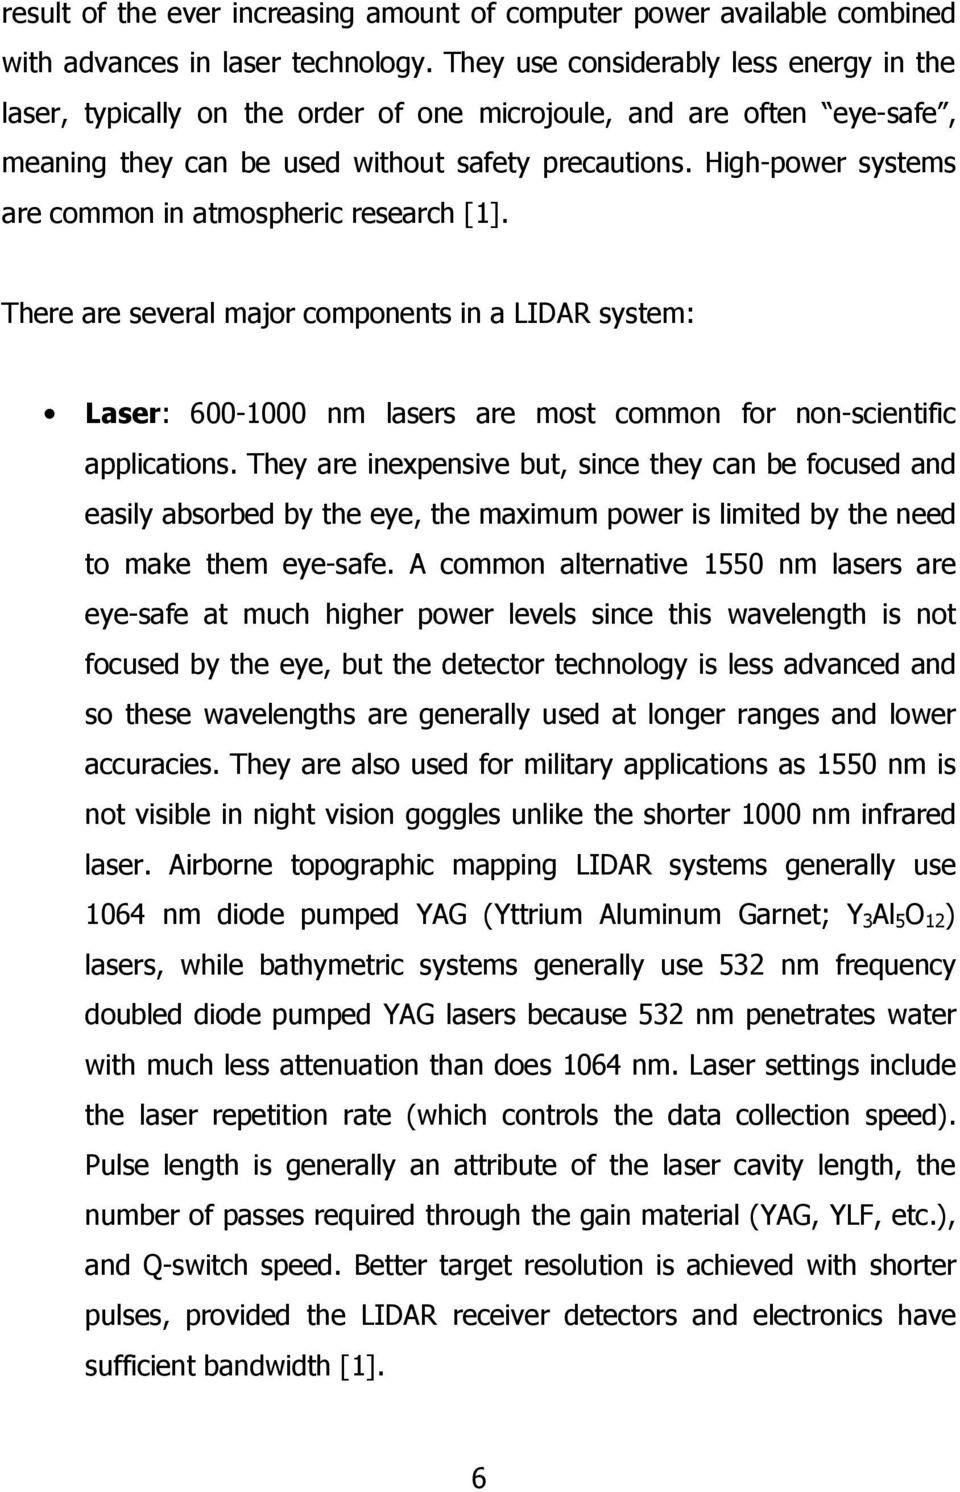 High-power systems are common in atmospheric research [1]. There are several major components in a LIDAR system: Laser: 600-1000 nm lasers are most common for non-scientific applications.